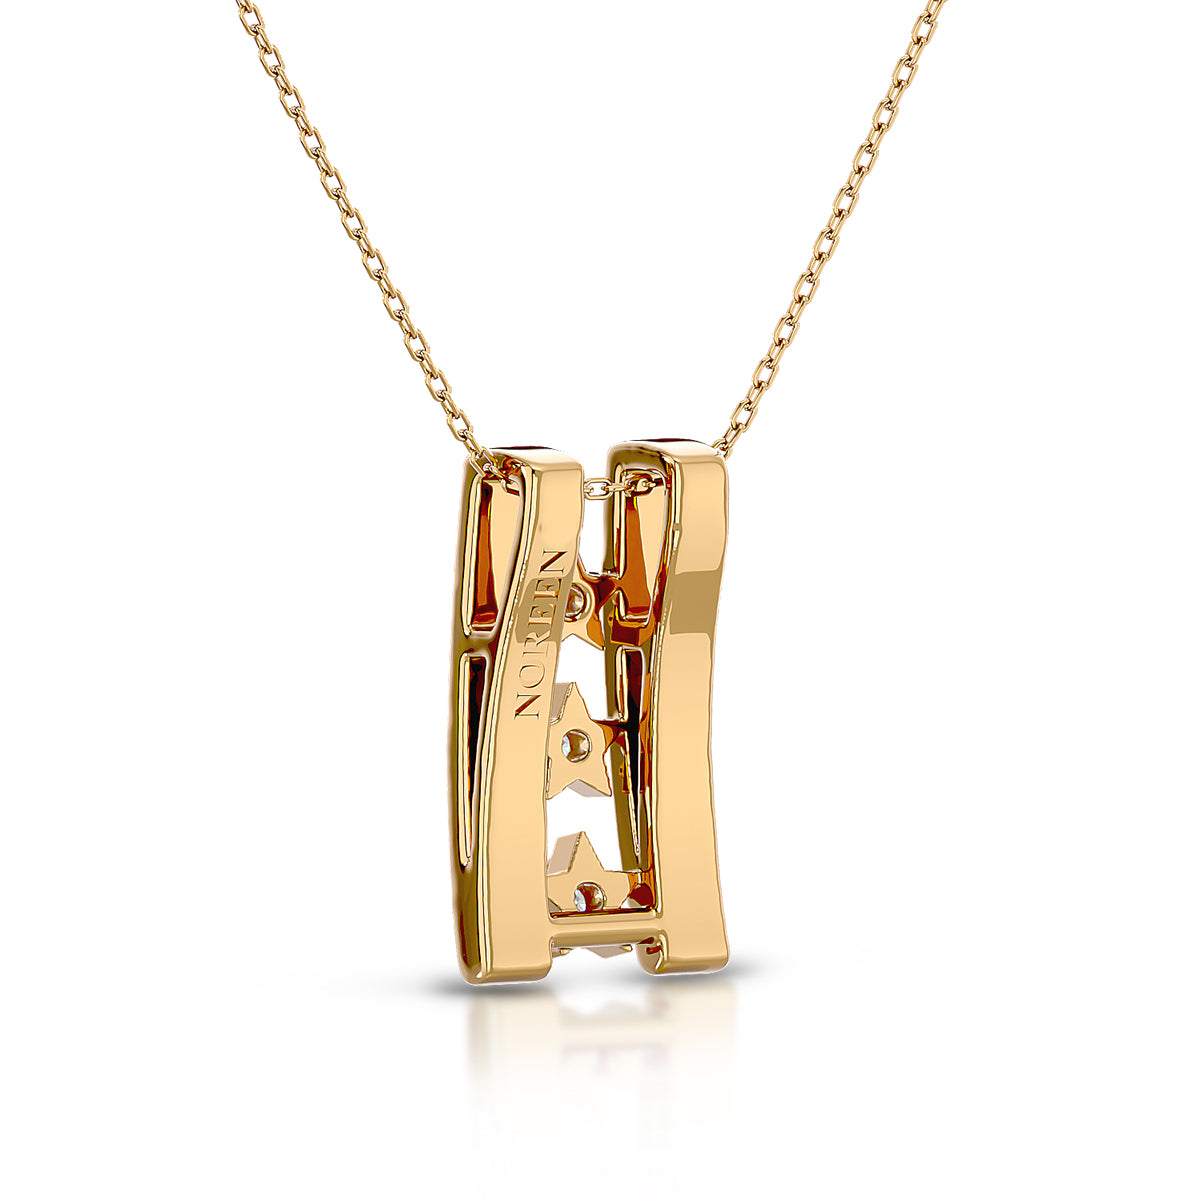 Empowerment Necklace 18K Gold With Diamonds